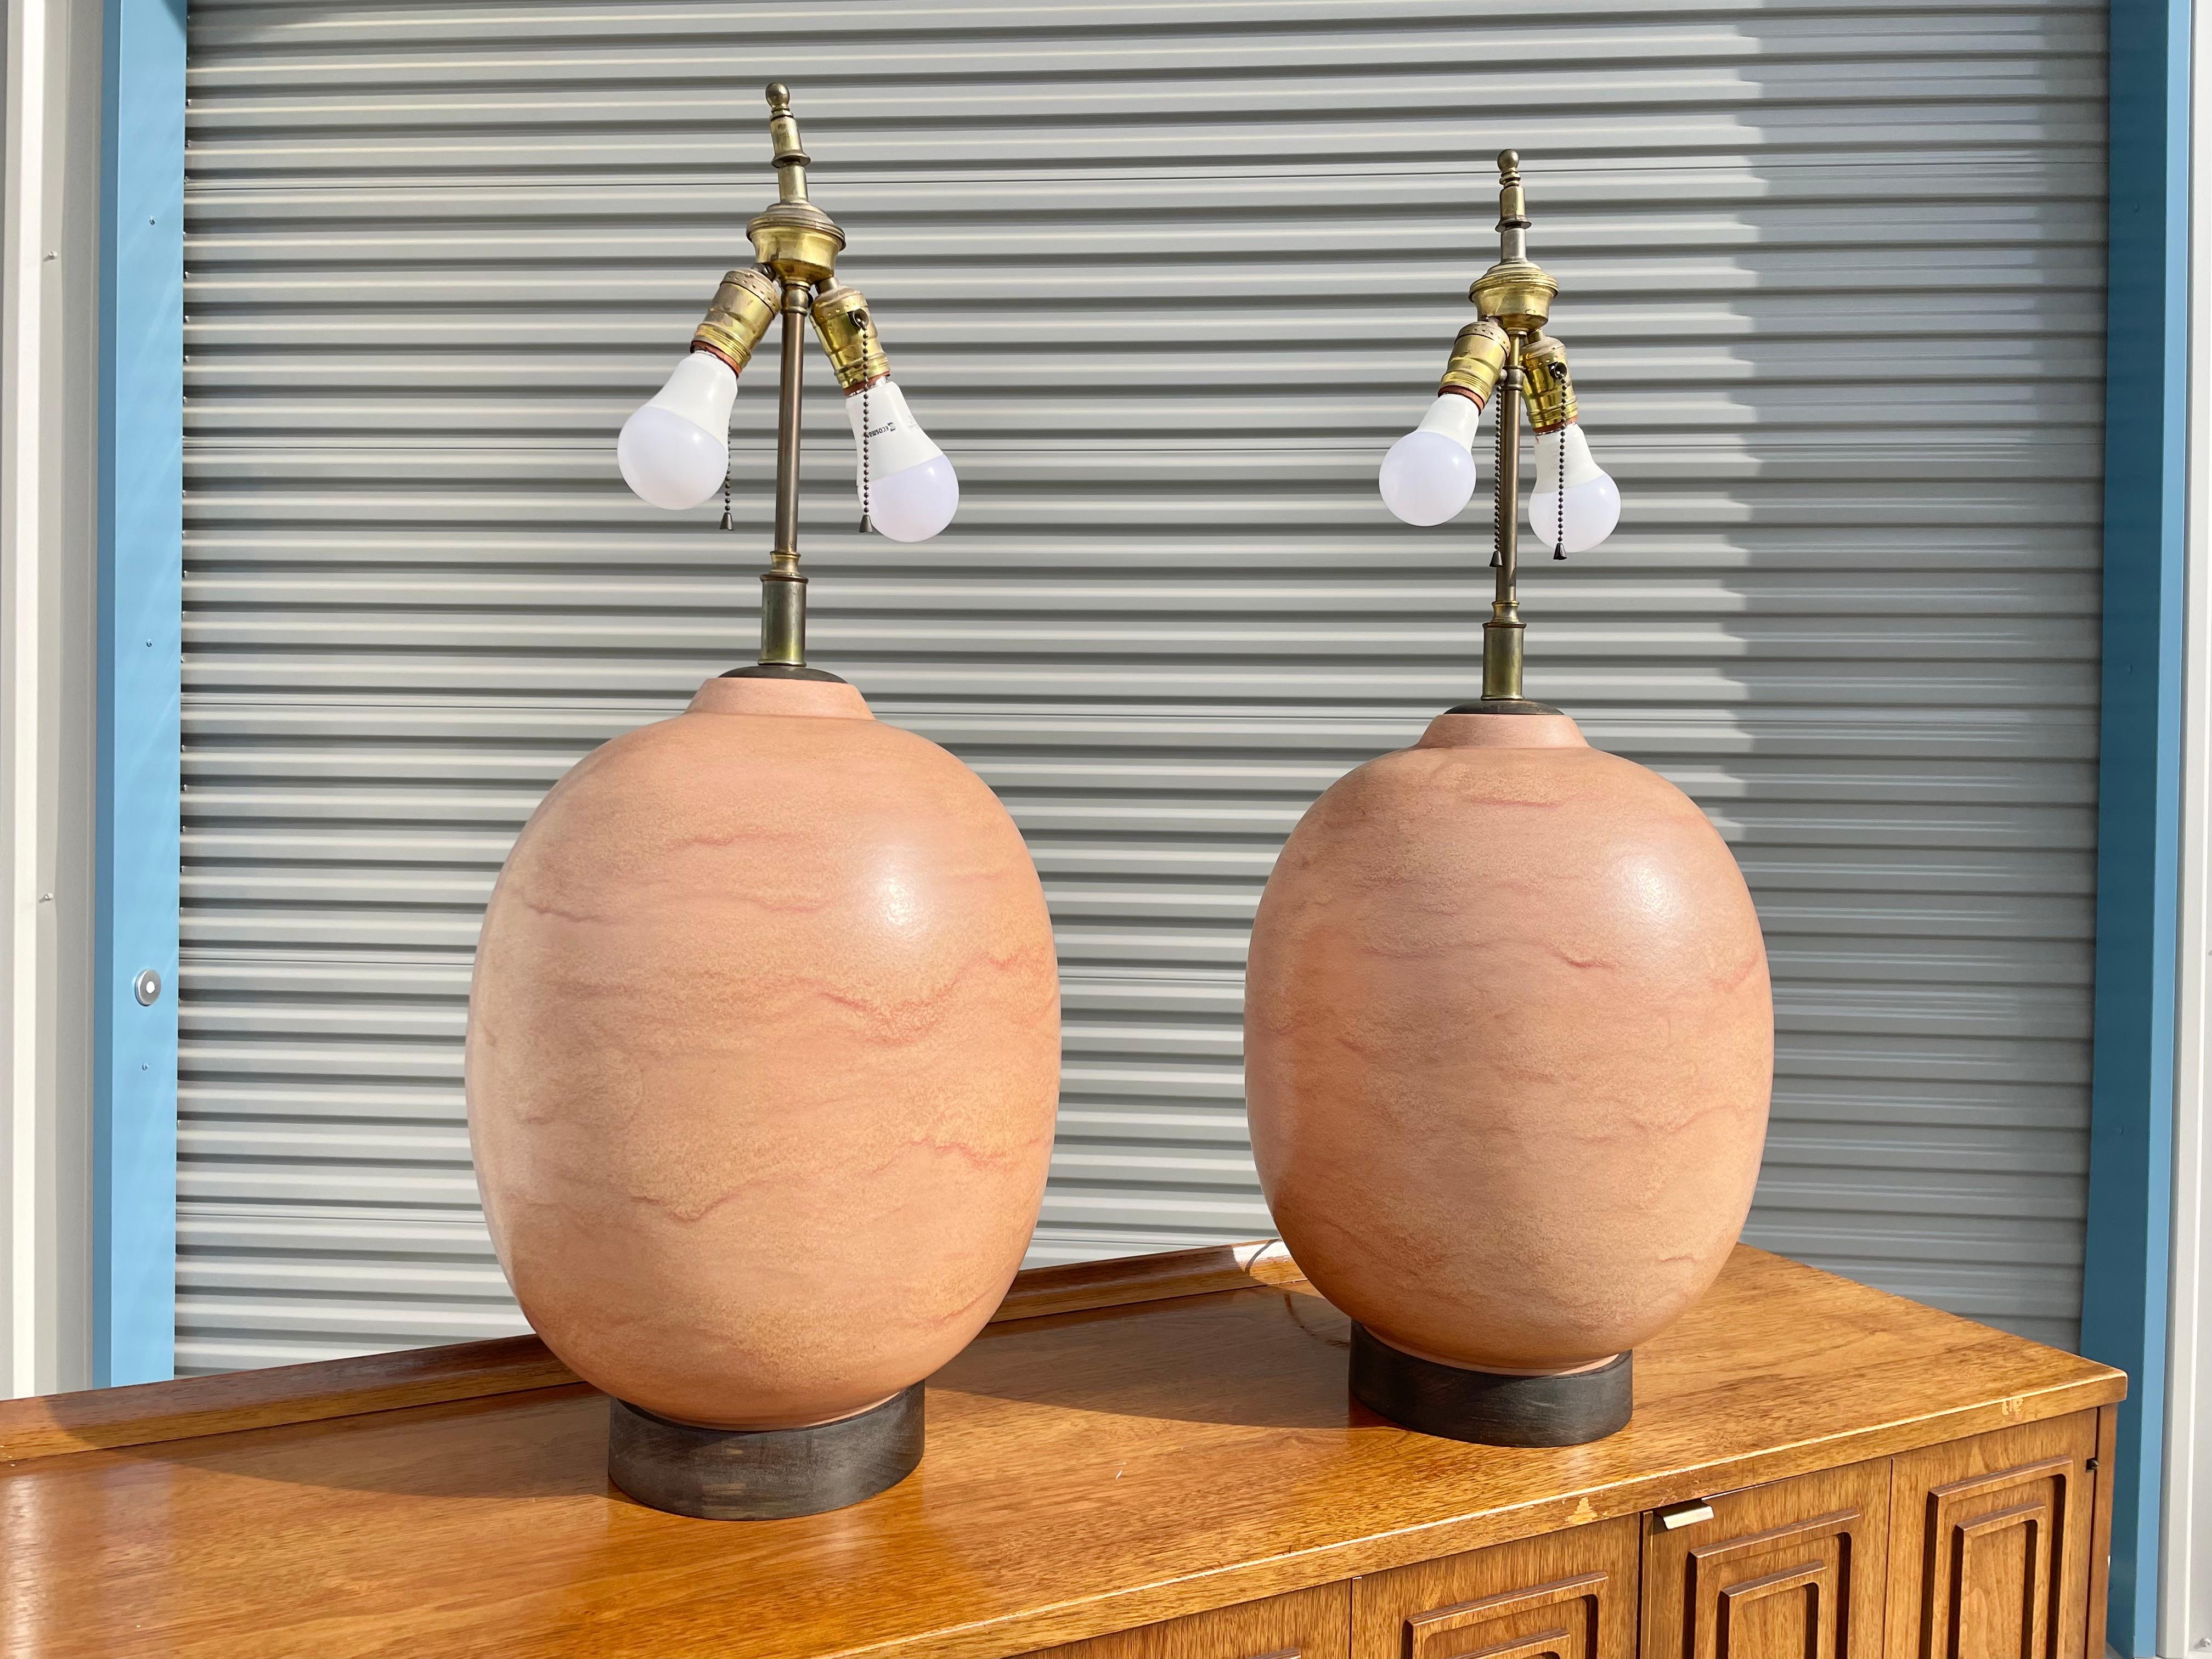 Vintage pair of ceramic lamps designed and manufactured in the United States circa 1970s. These beautiful lamps have a fantastic ceramic egg shape design with beautifully glazed finished. You can tell that the designer put all his heart into this